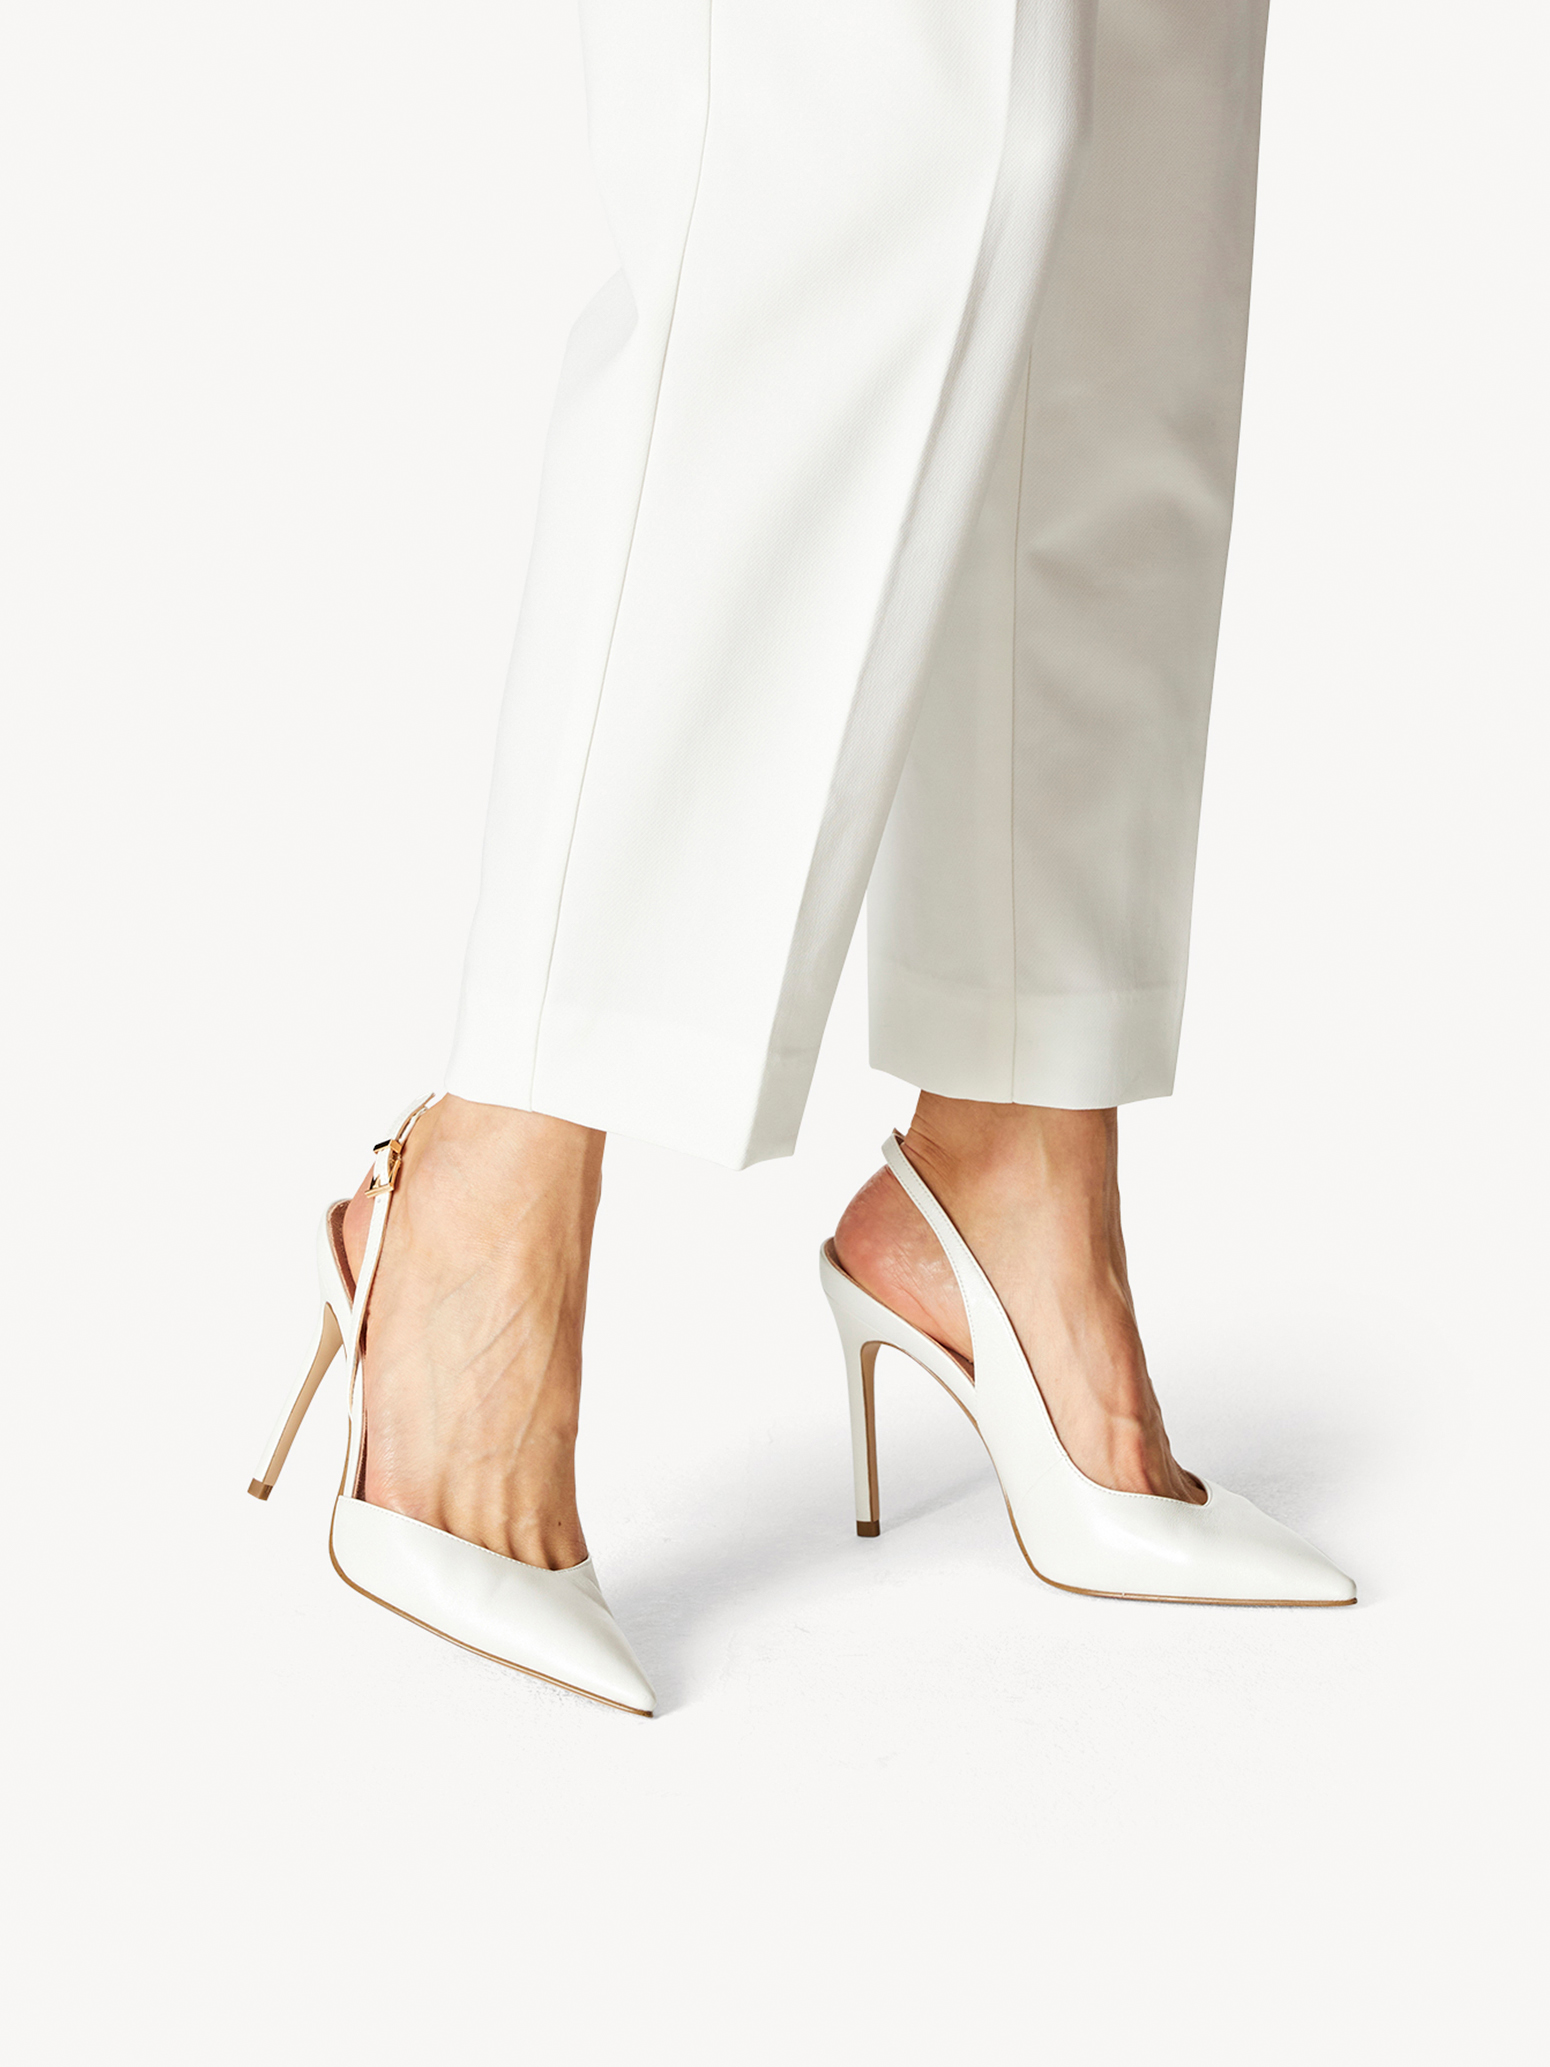 Leather sling pumps - white, WHITE PEARL, hi-res